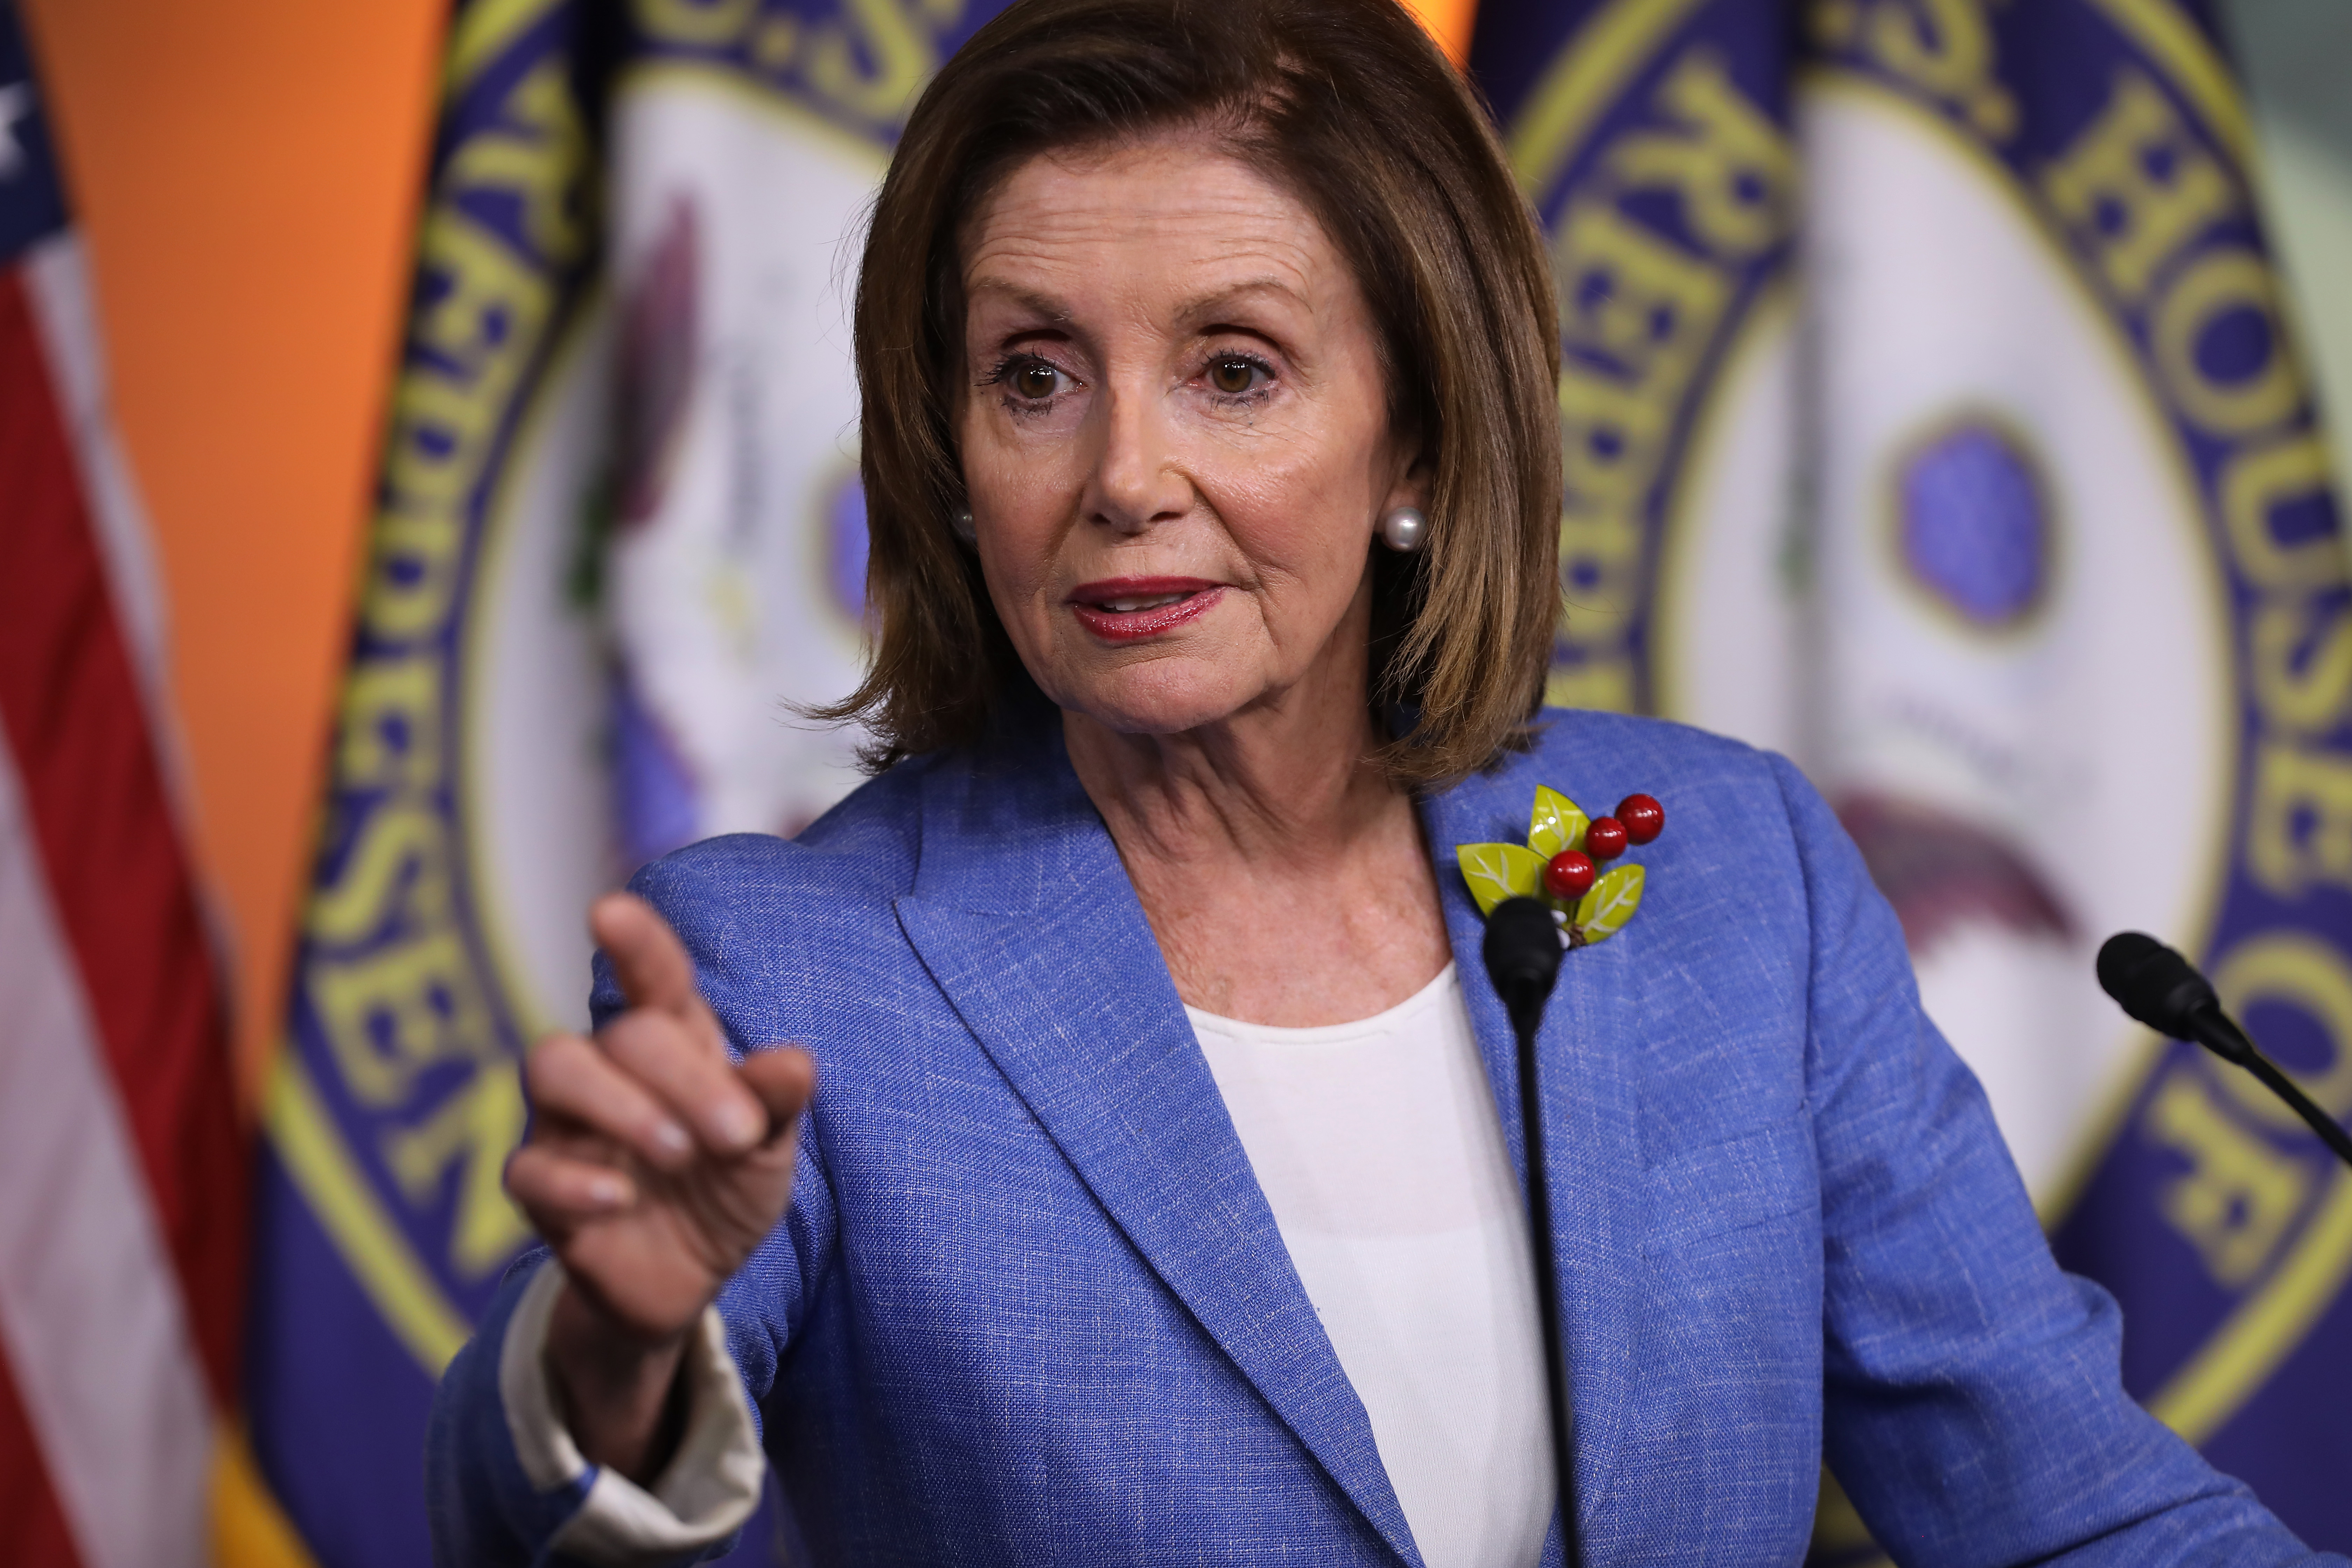 Nancy Pelosi, the speaker of the House, points during a press conference at the Capitol.